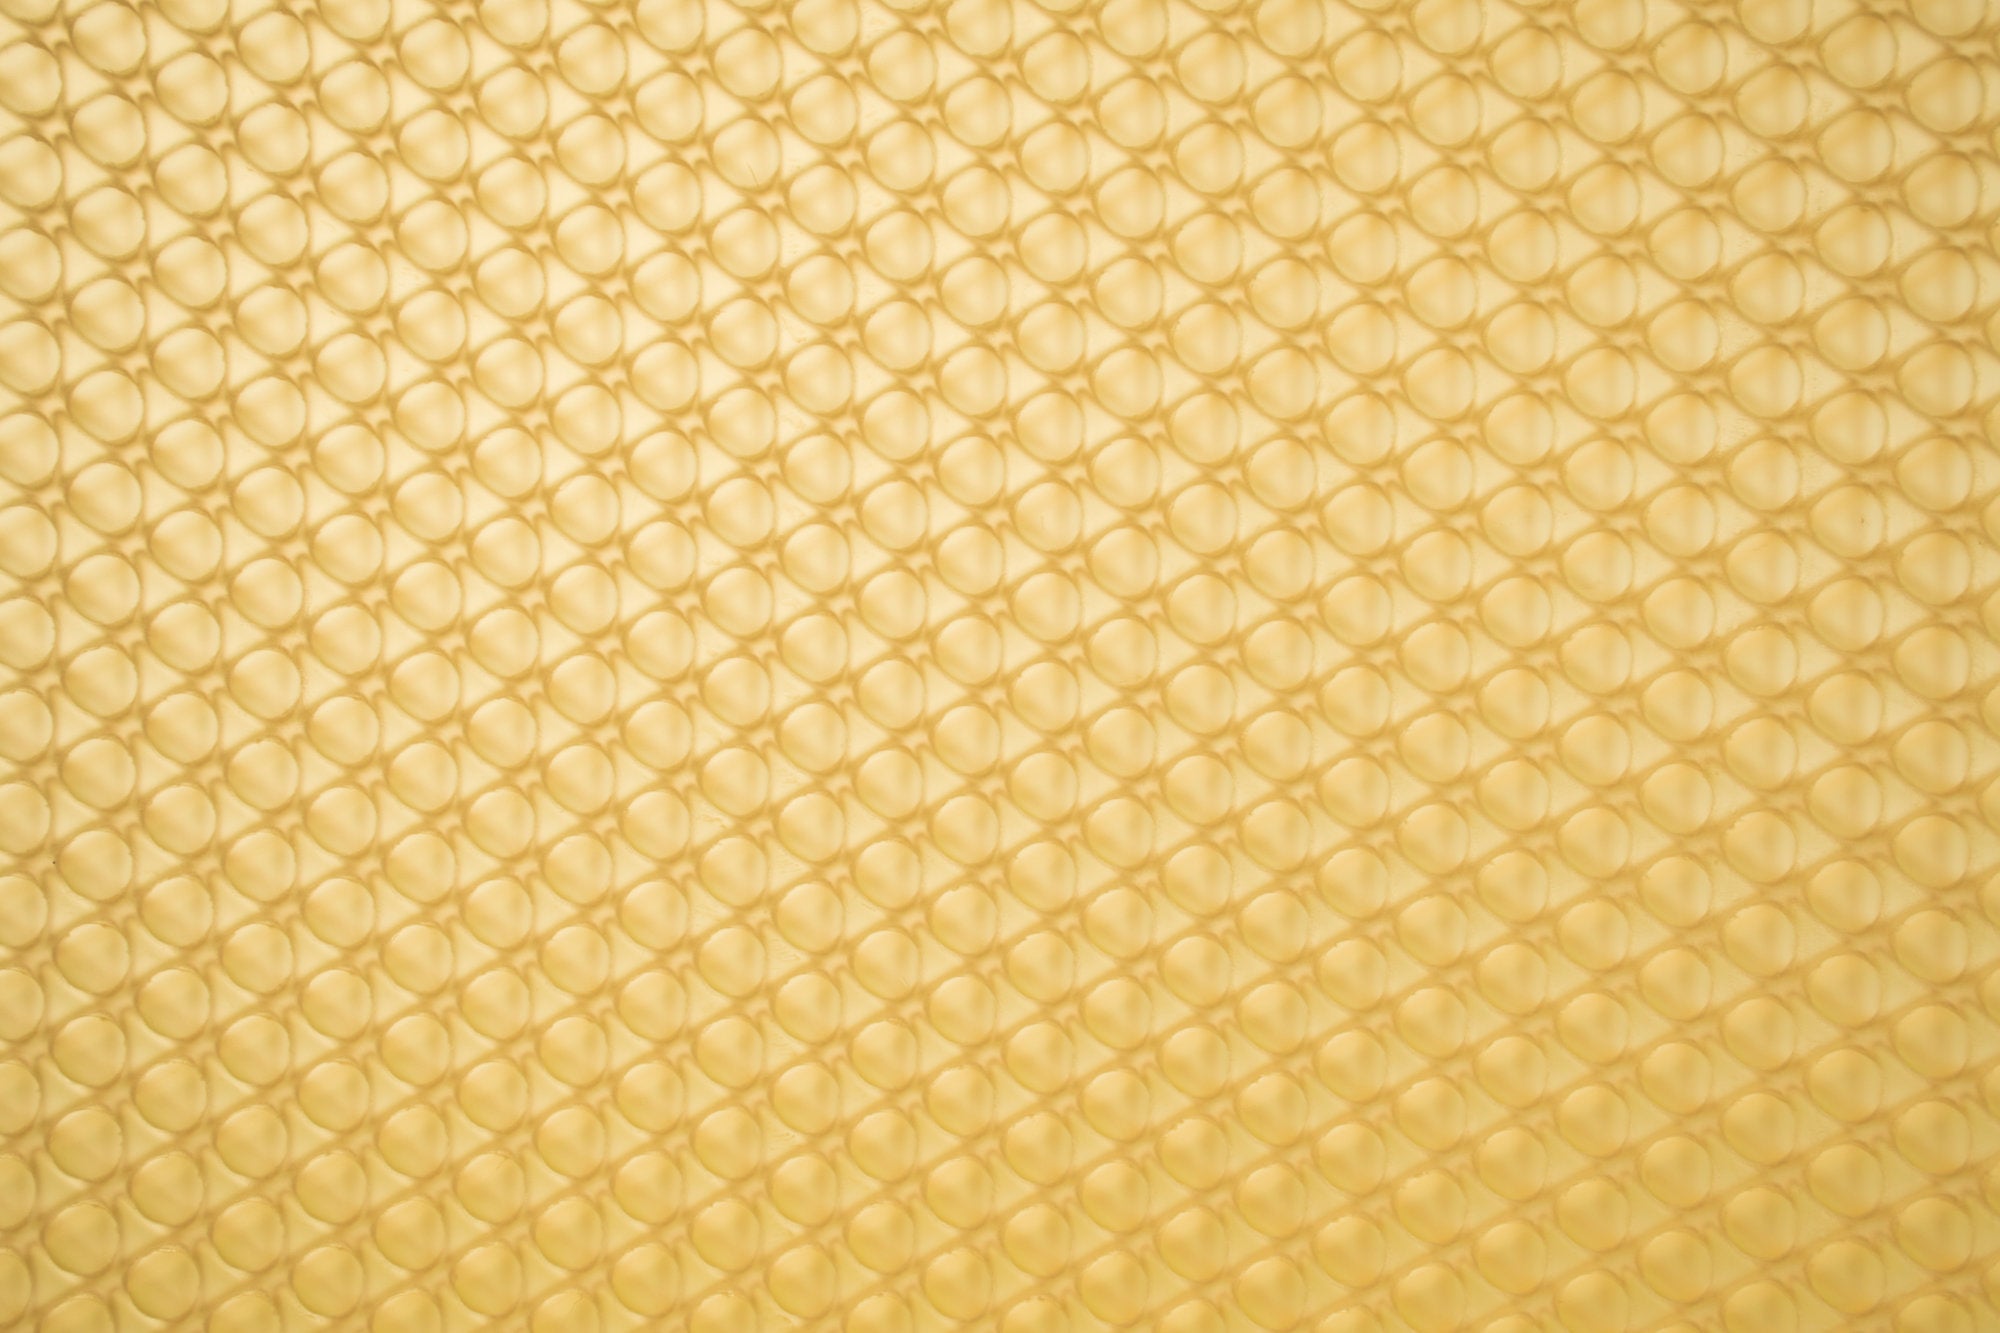 A detail of a gold colored lighting panel in the Fascitelli Center for Advanced Engineering